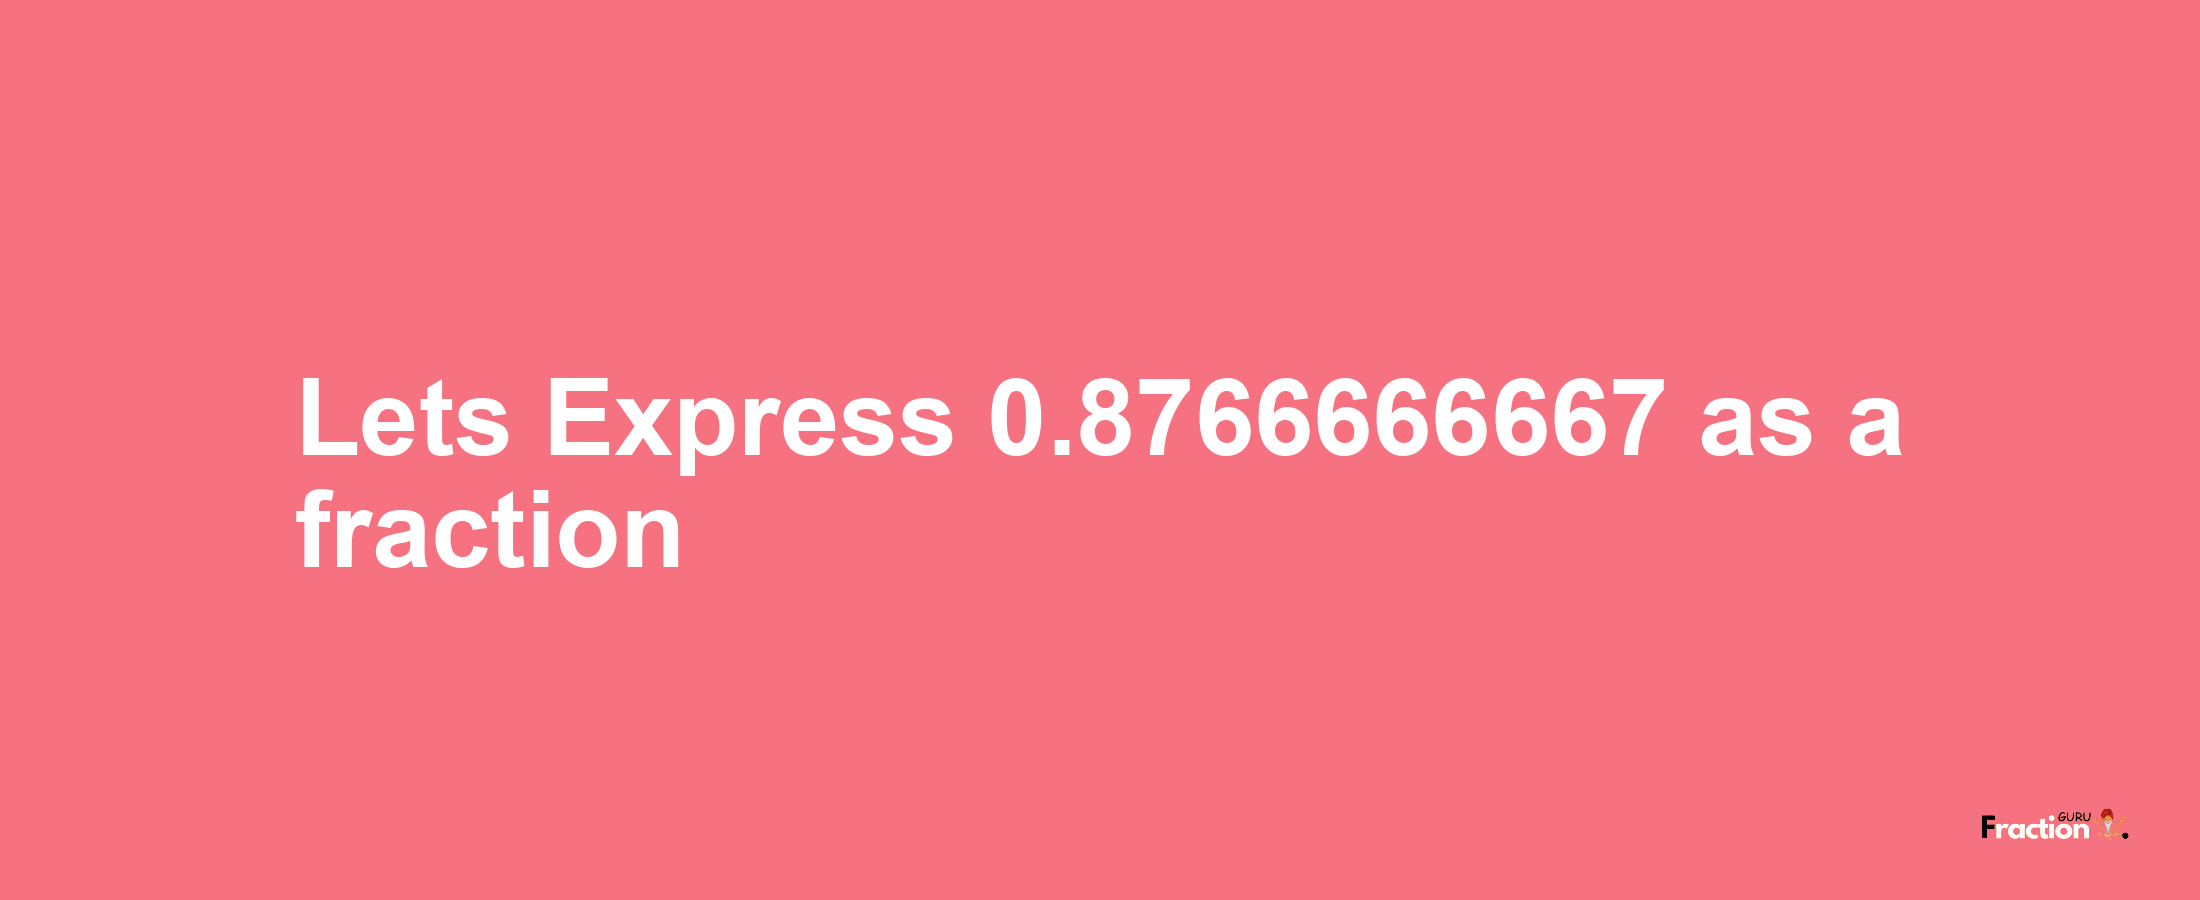 Lets Express 0.8766666667 as afraction